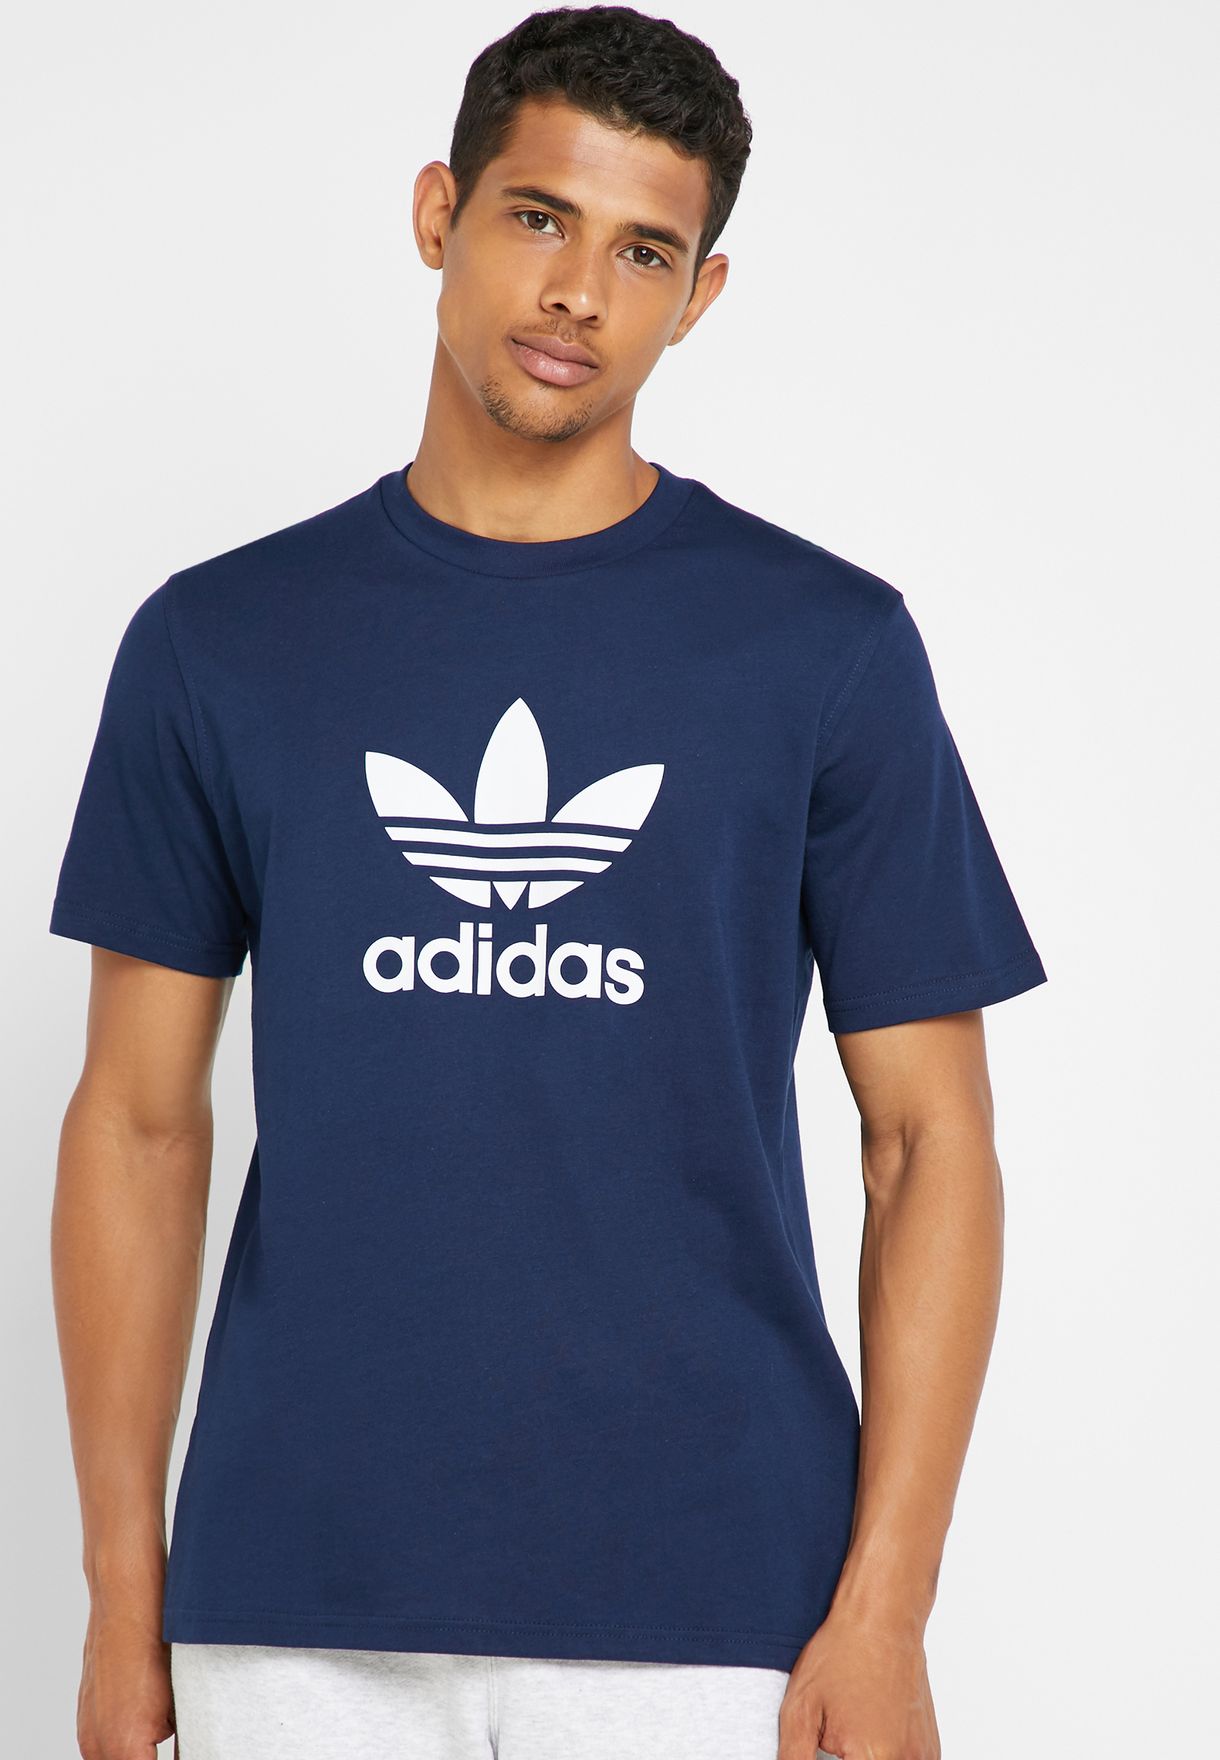 adidas originals trefoil tee,Save up to 16%,www.syncro-system.bg